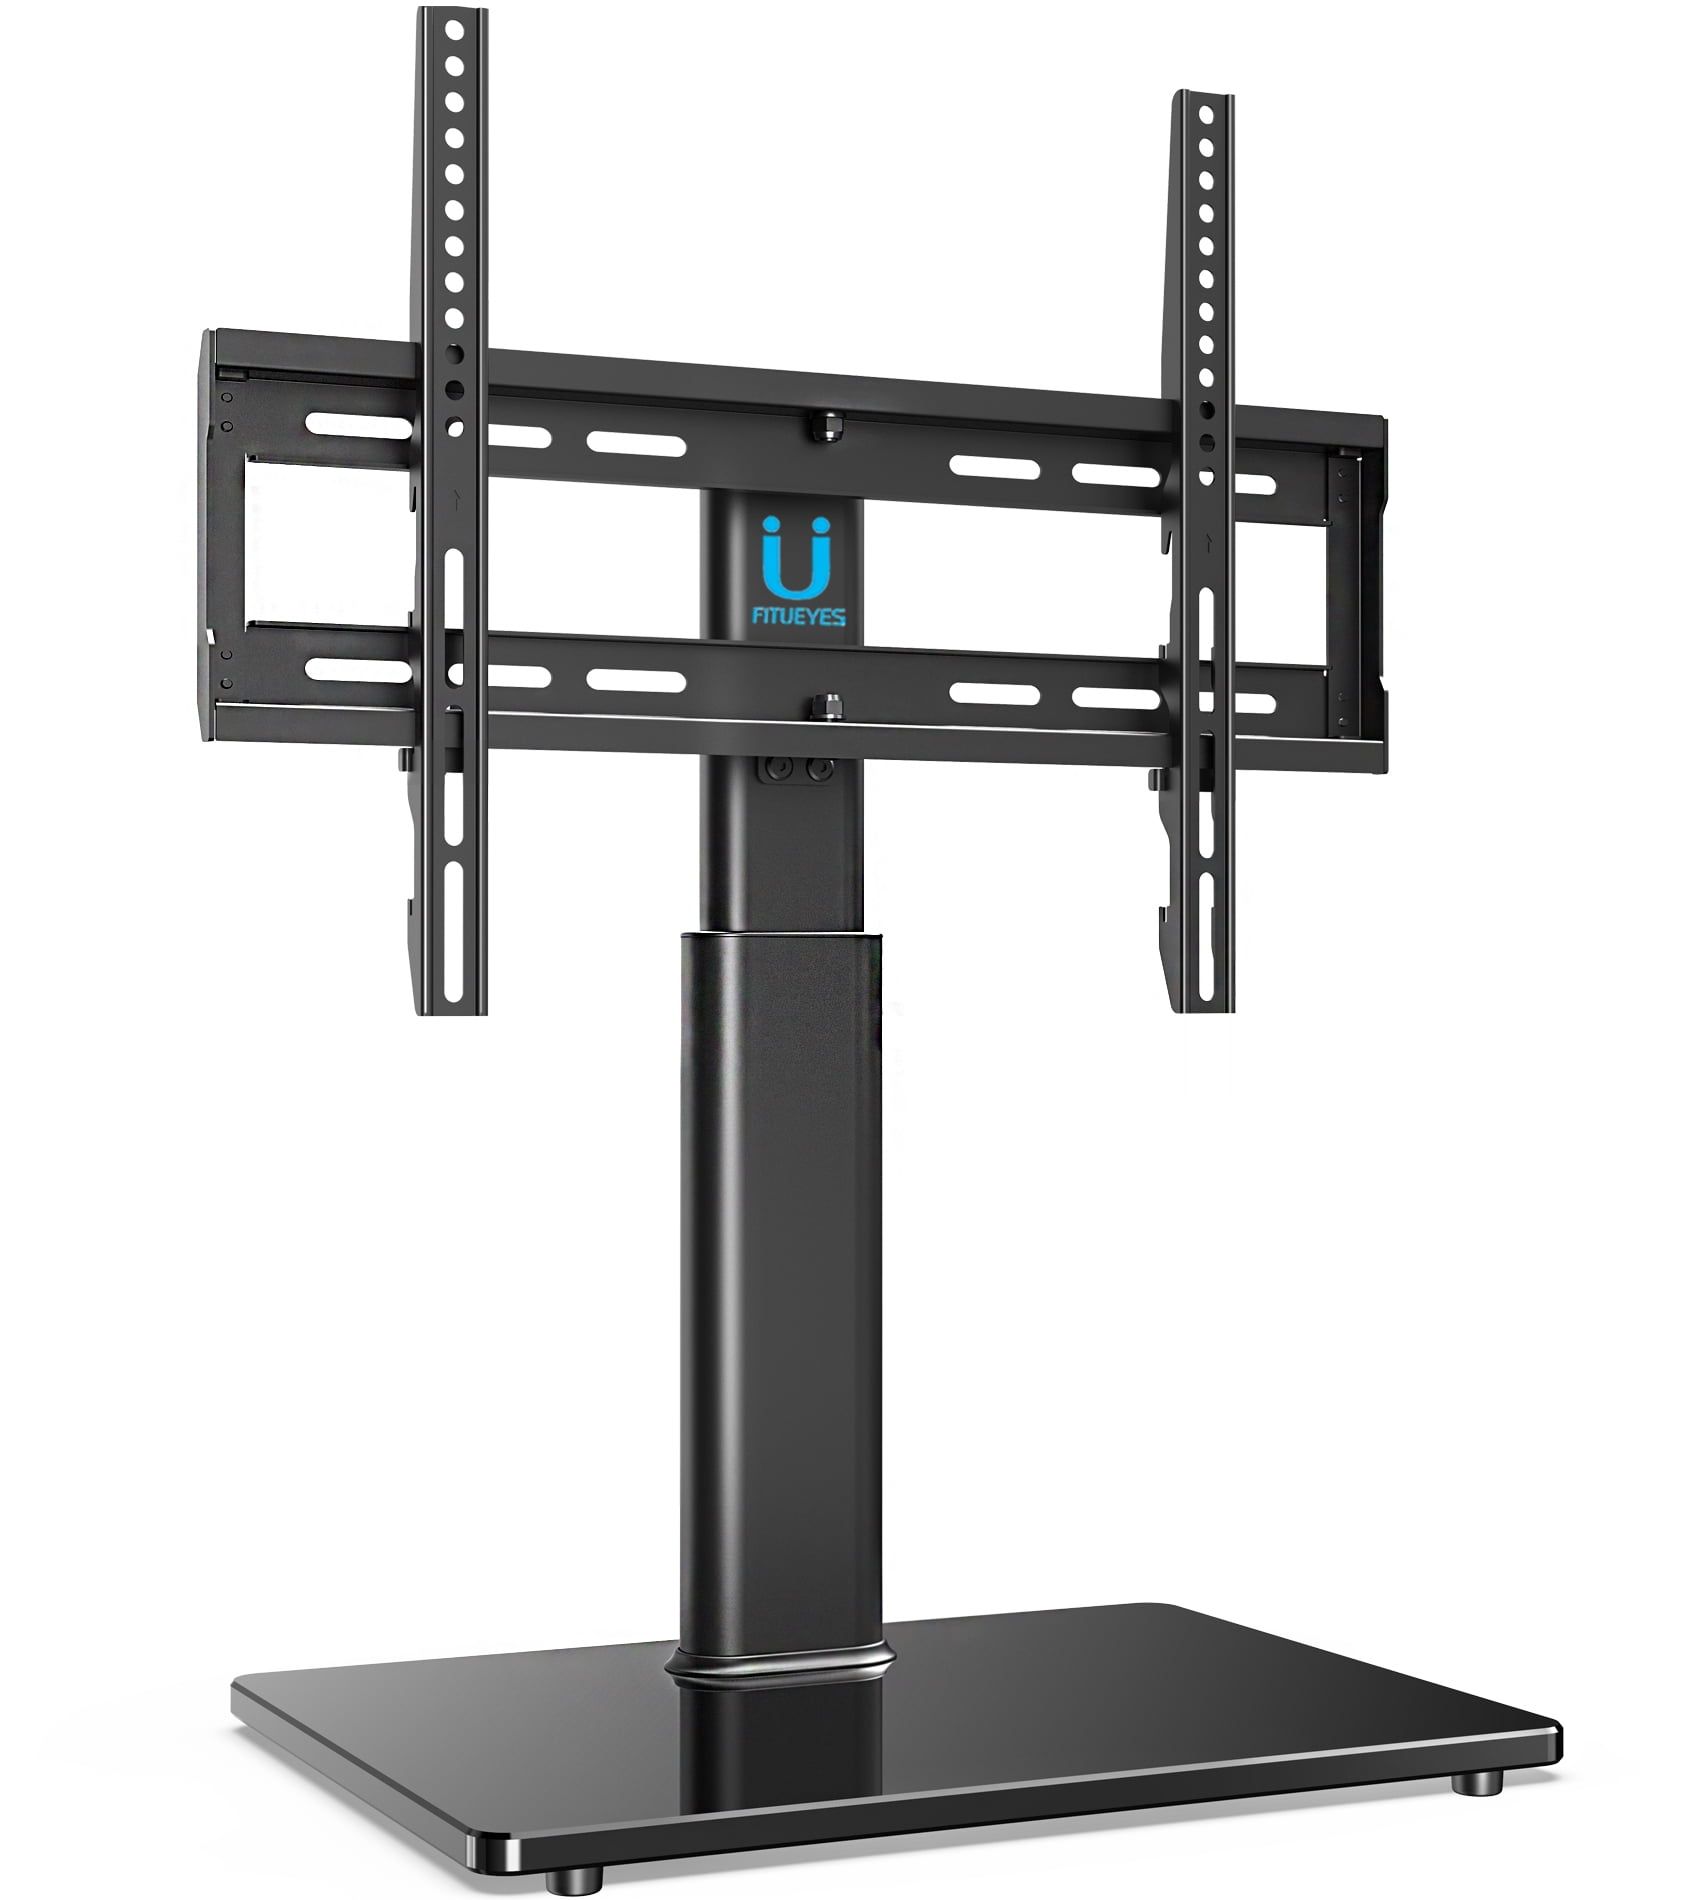 Fitueyes Universal Tv Stand Tabletop Base With Swivel Mount For 32 To With Universal Tabletop Tv Stands (Gallery 7 of 20)